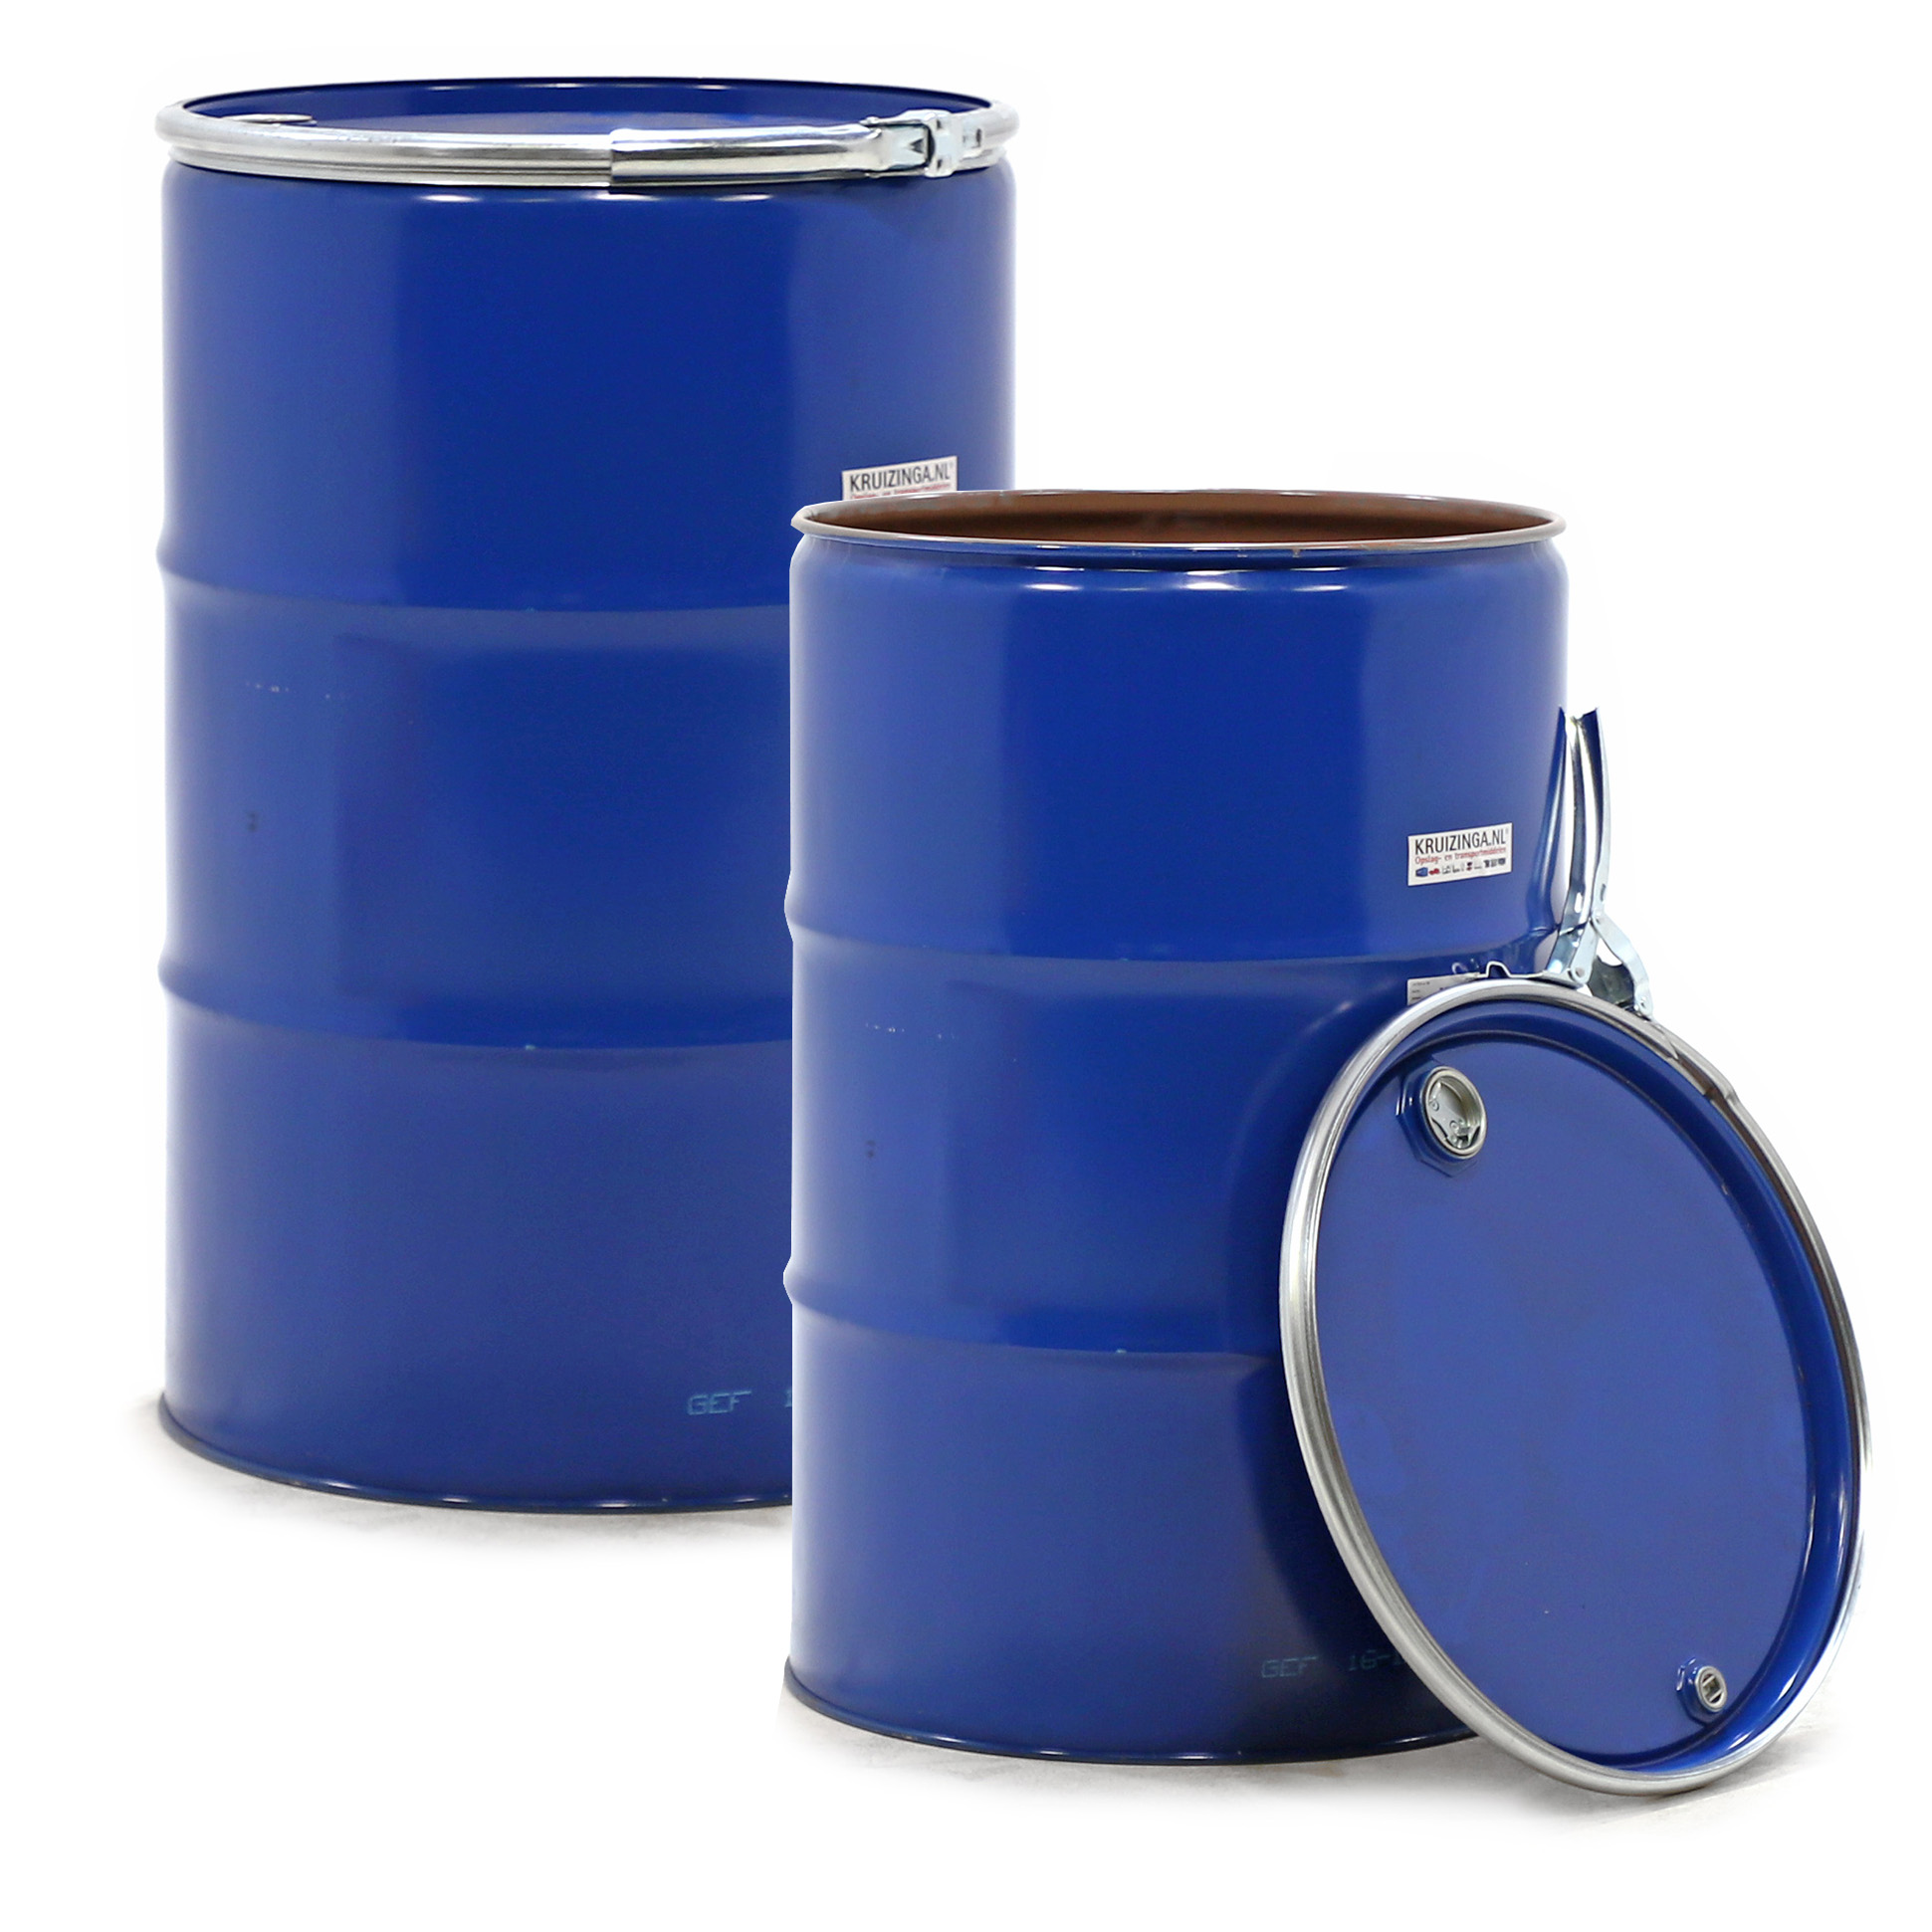 various bonded drums for all your liquids